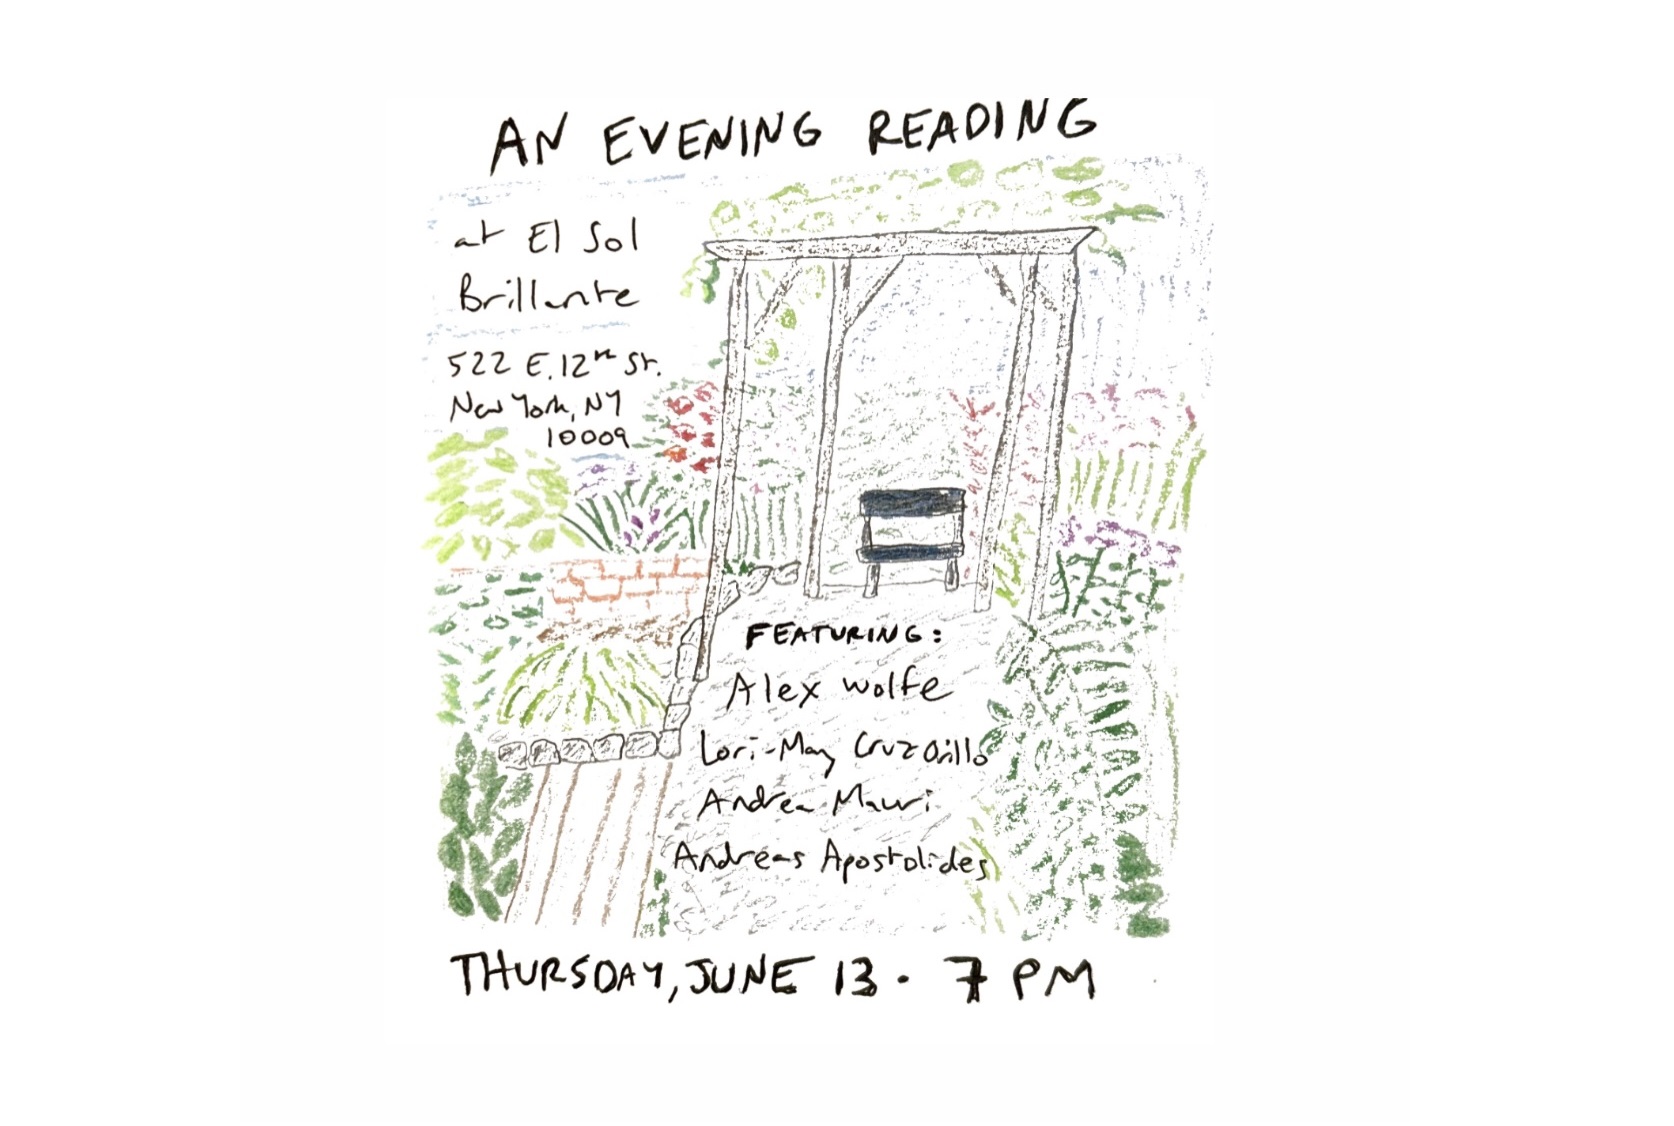 Illustration flyer for an evening reading at el sol brillante with a drawing of the garden's arbor, some plots, and a bench